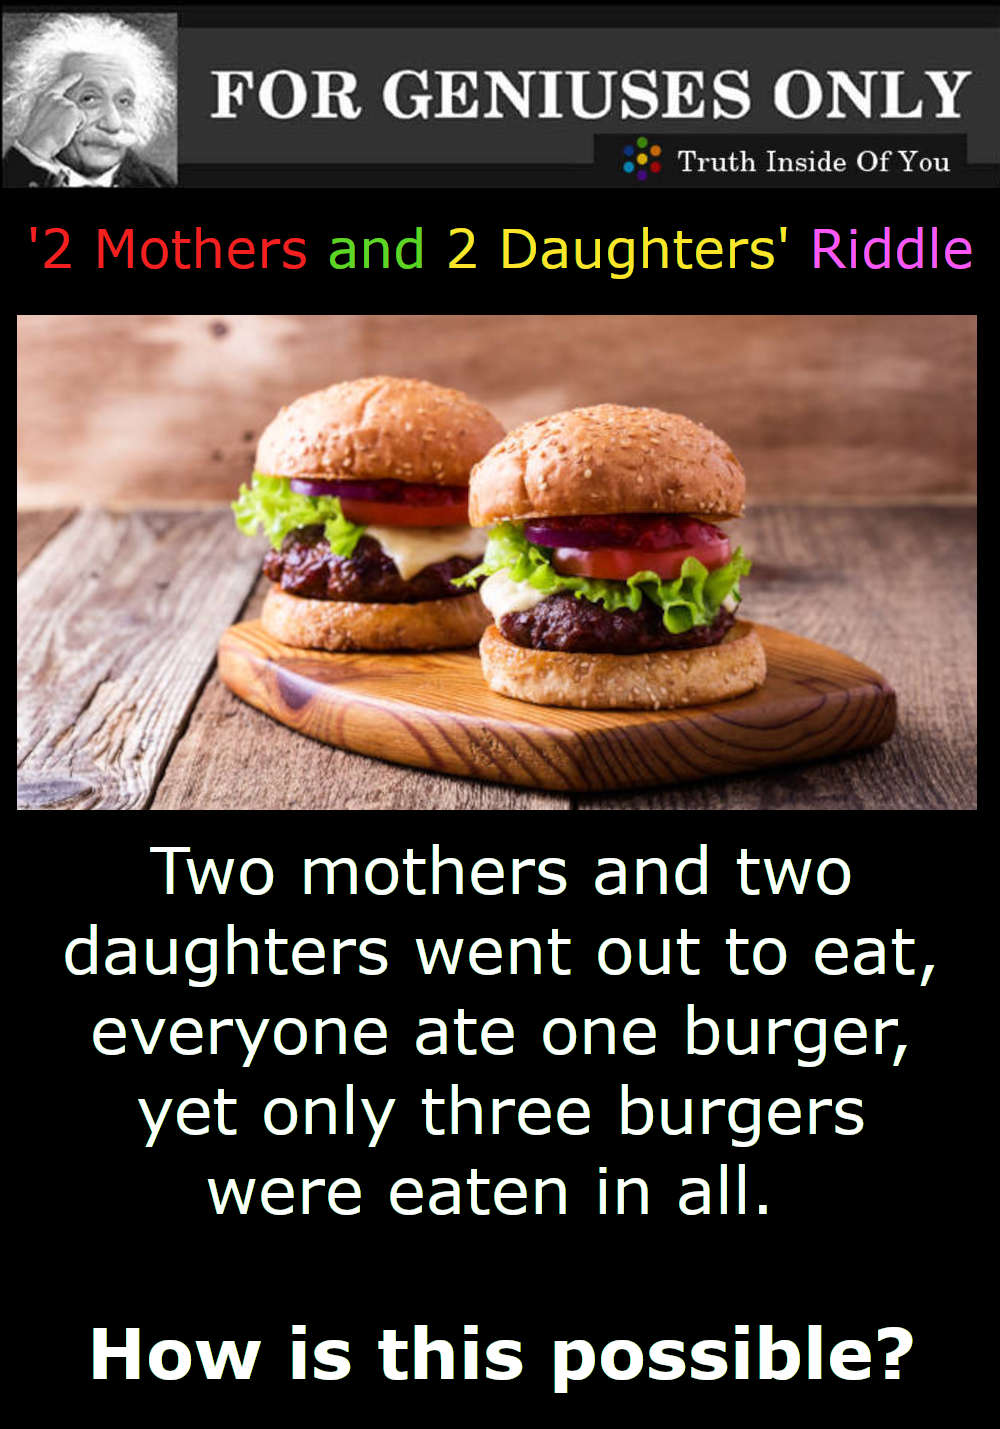 Two mothers and two daughters went out to eat, everyone ate one burger, yet only three burgers were eaten in all. How is this possible?